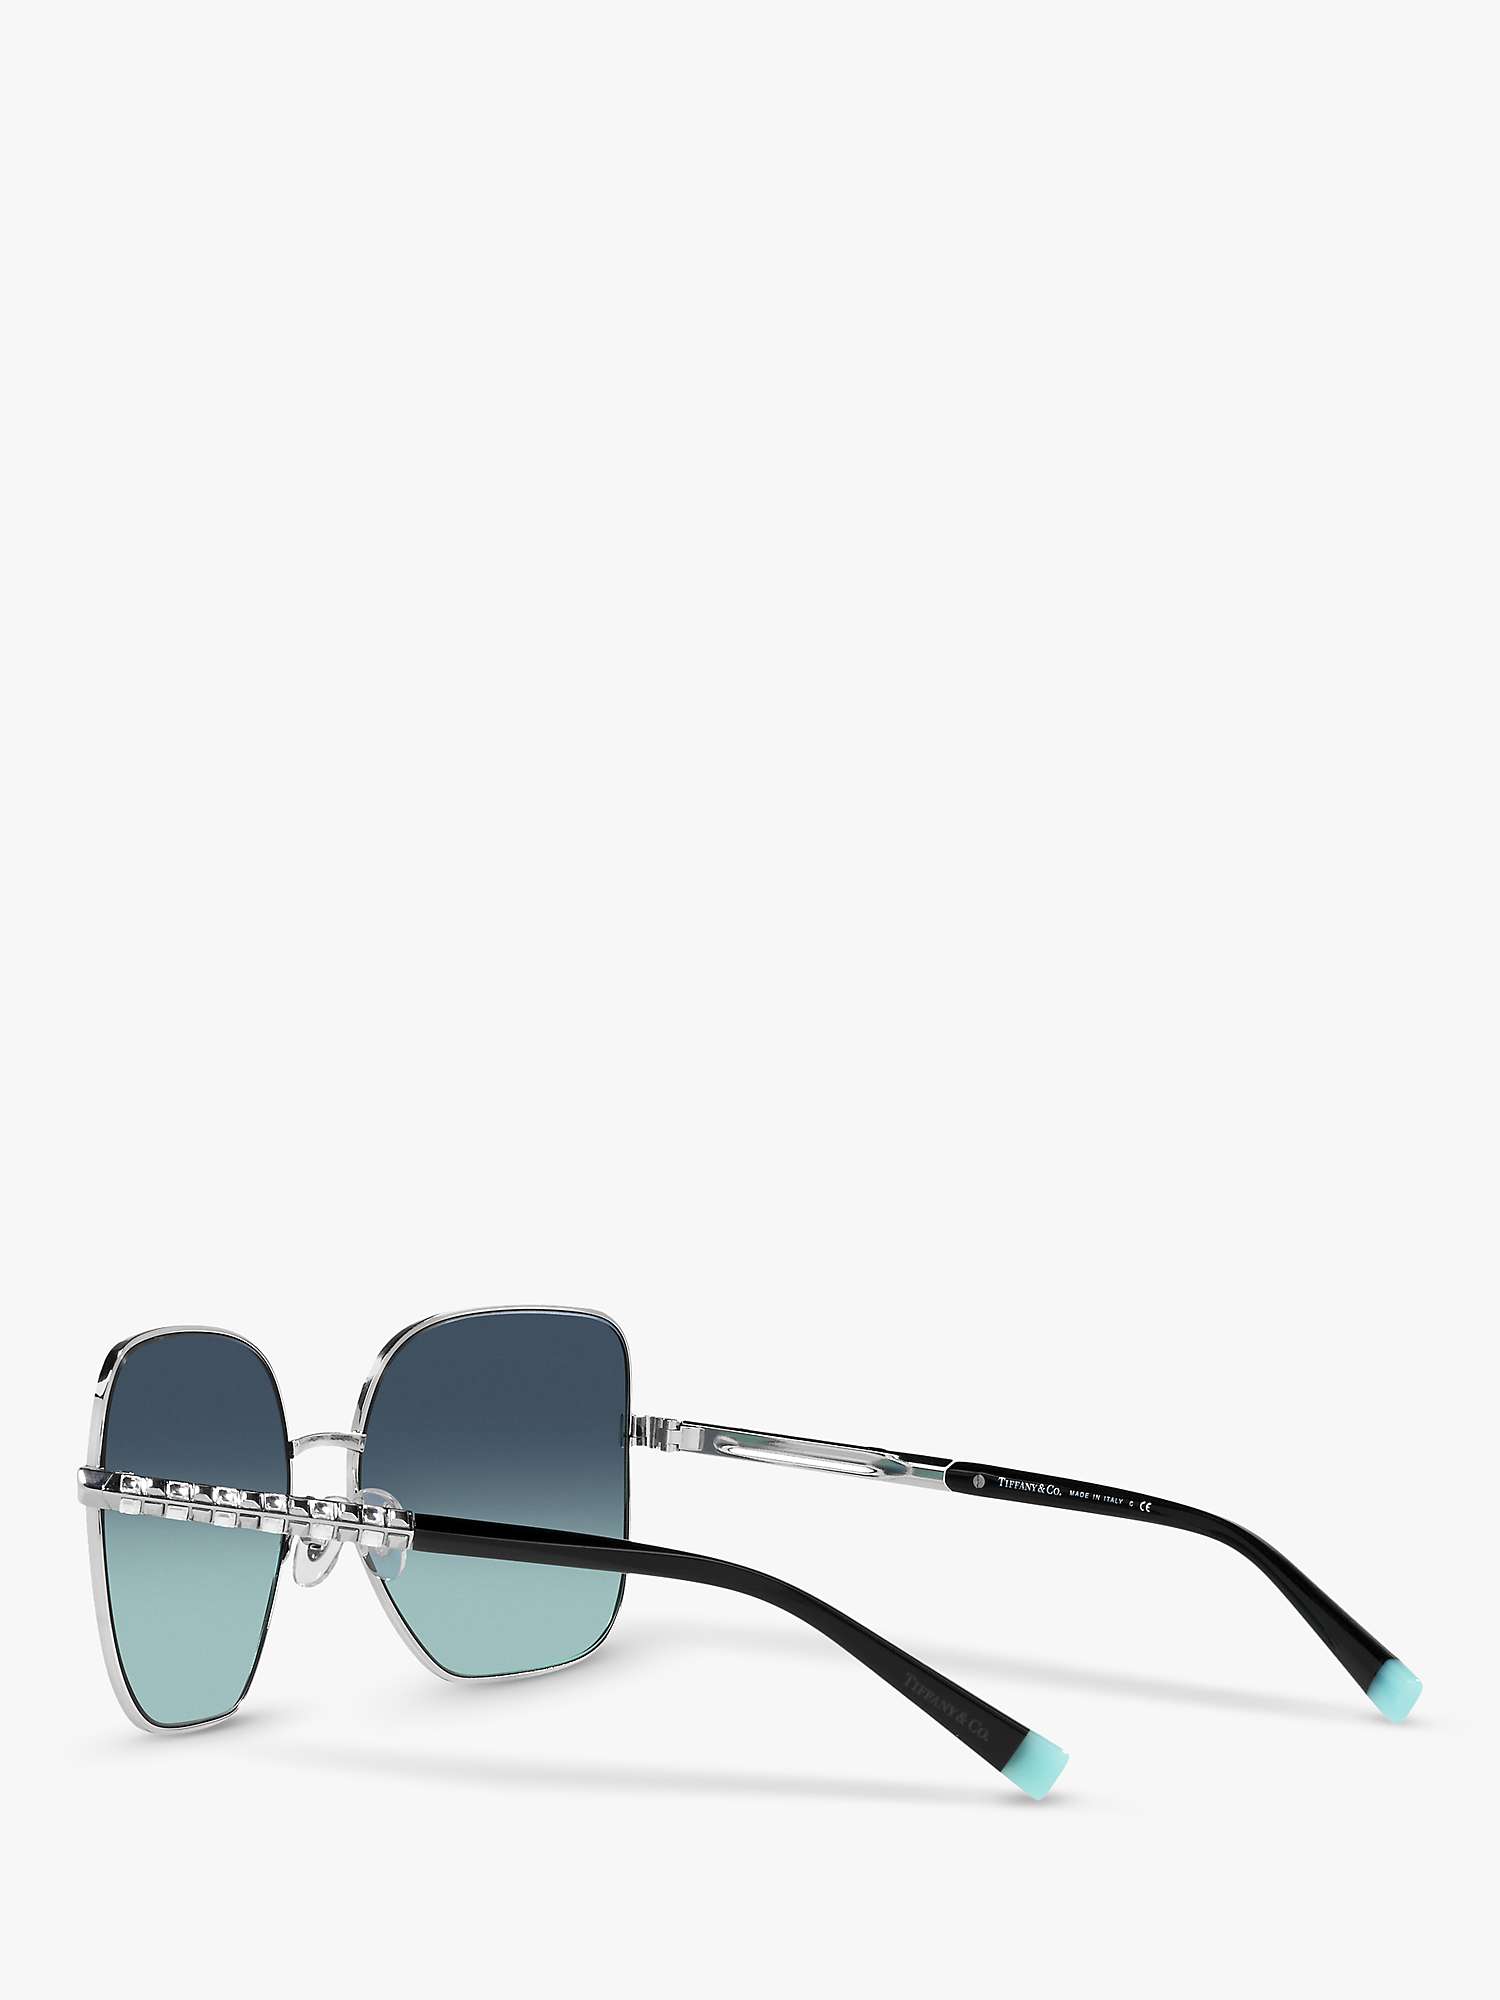 Buy Tiffany & Co TF3078 Women's Square Sunglasses, Silver/Blue Gradient Online at johnlewis.com